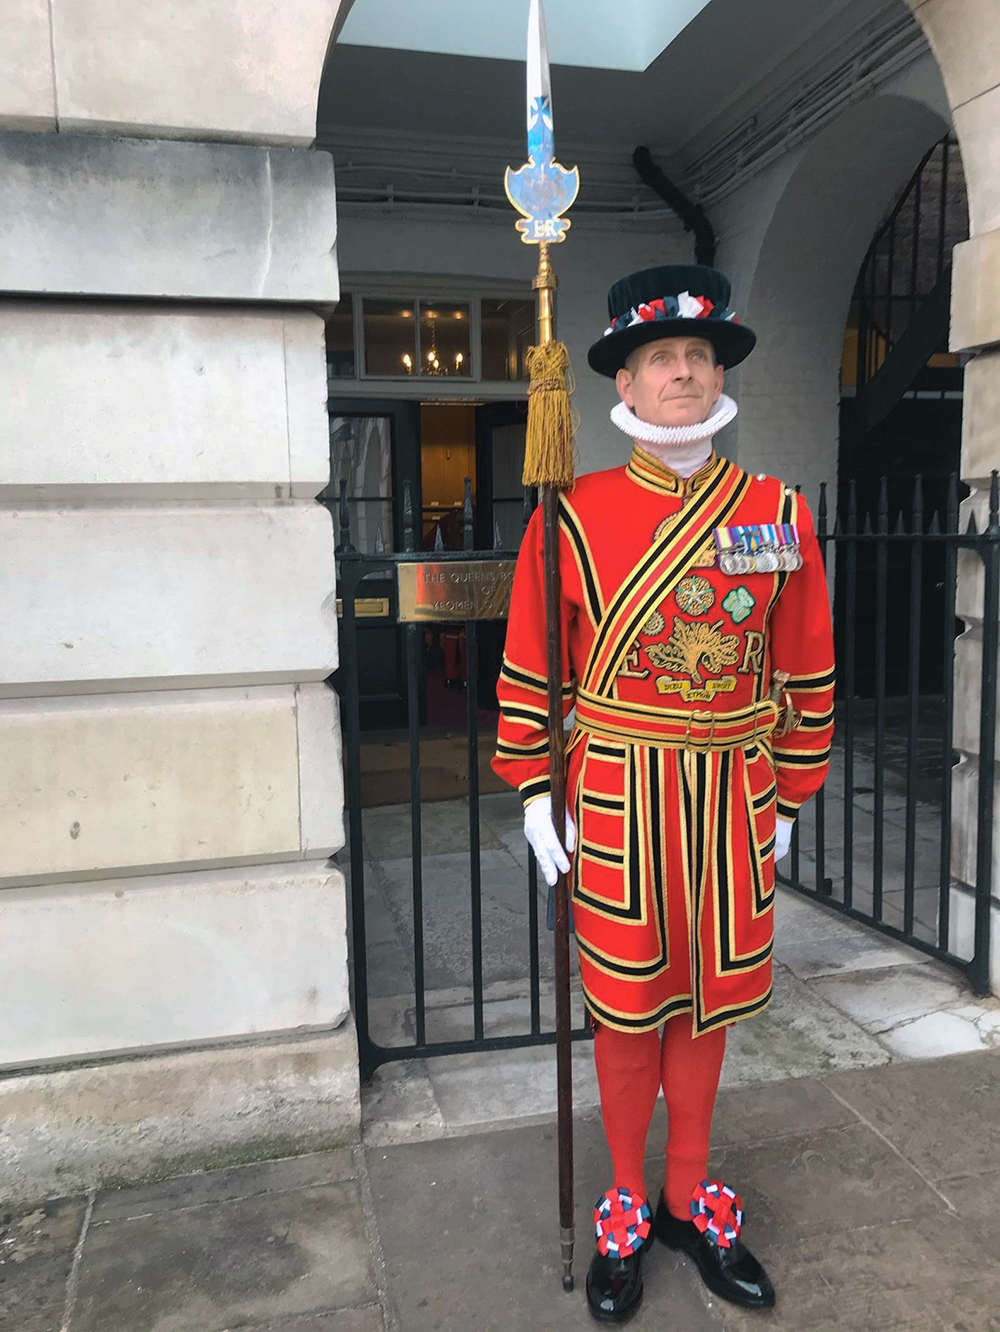 Sergeant Matthew Smith, Queen’s Body Guard of the Yeoman of the Guard